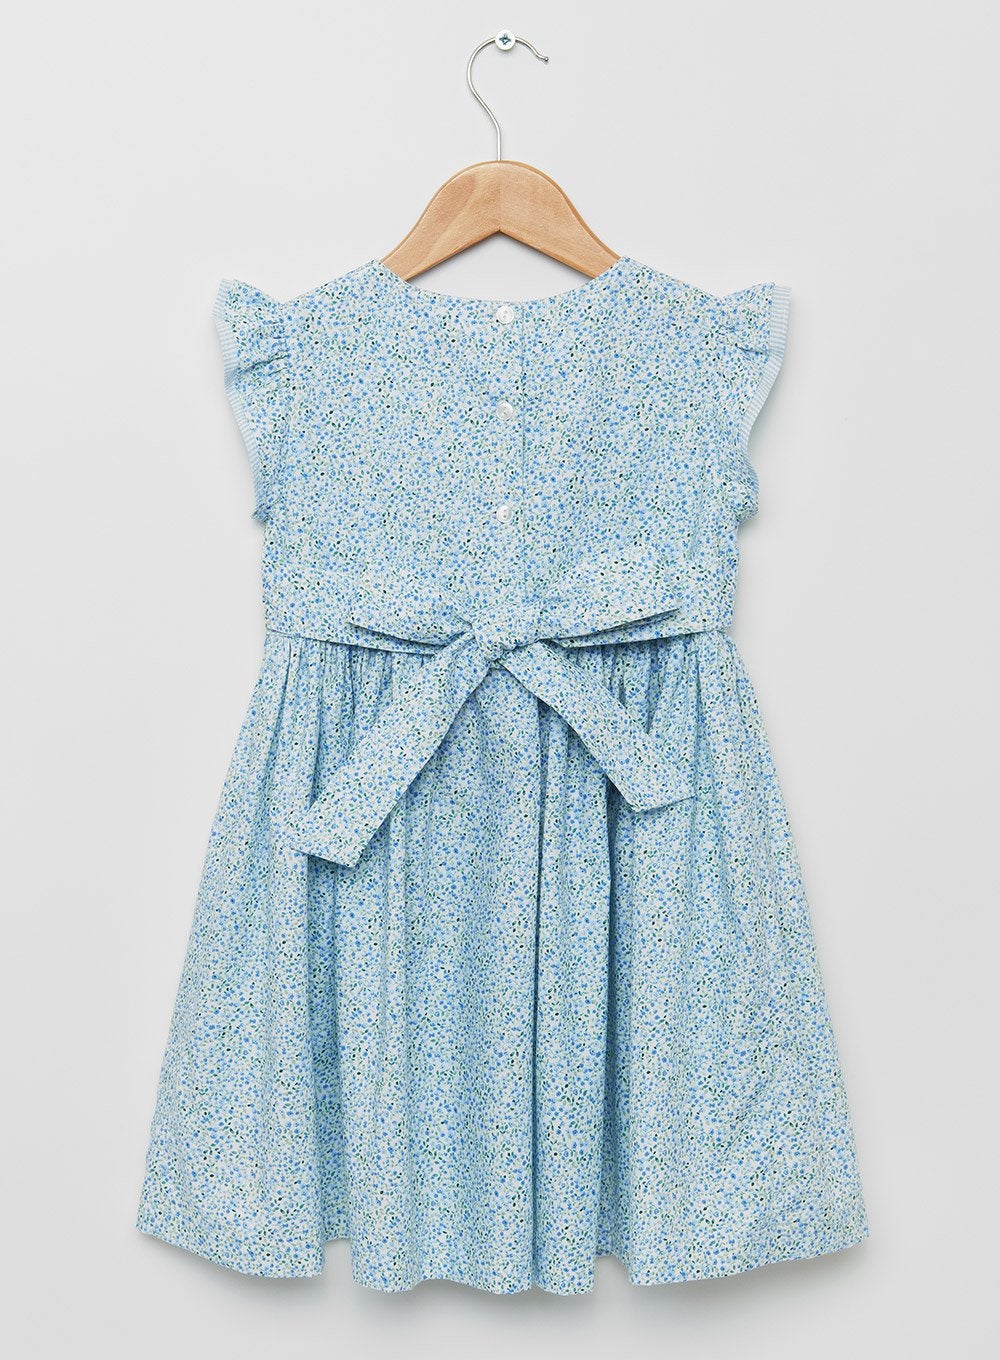 Confiture Dress Ophelia Frill Sleeve Dress in Blue Ditsy - Trotters Childrenswear